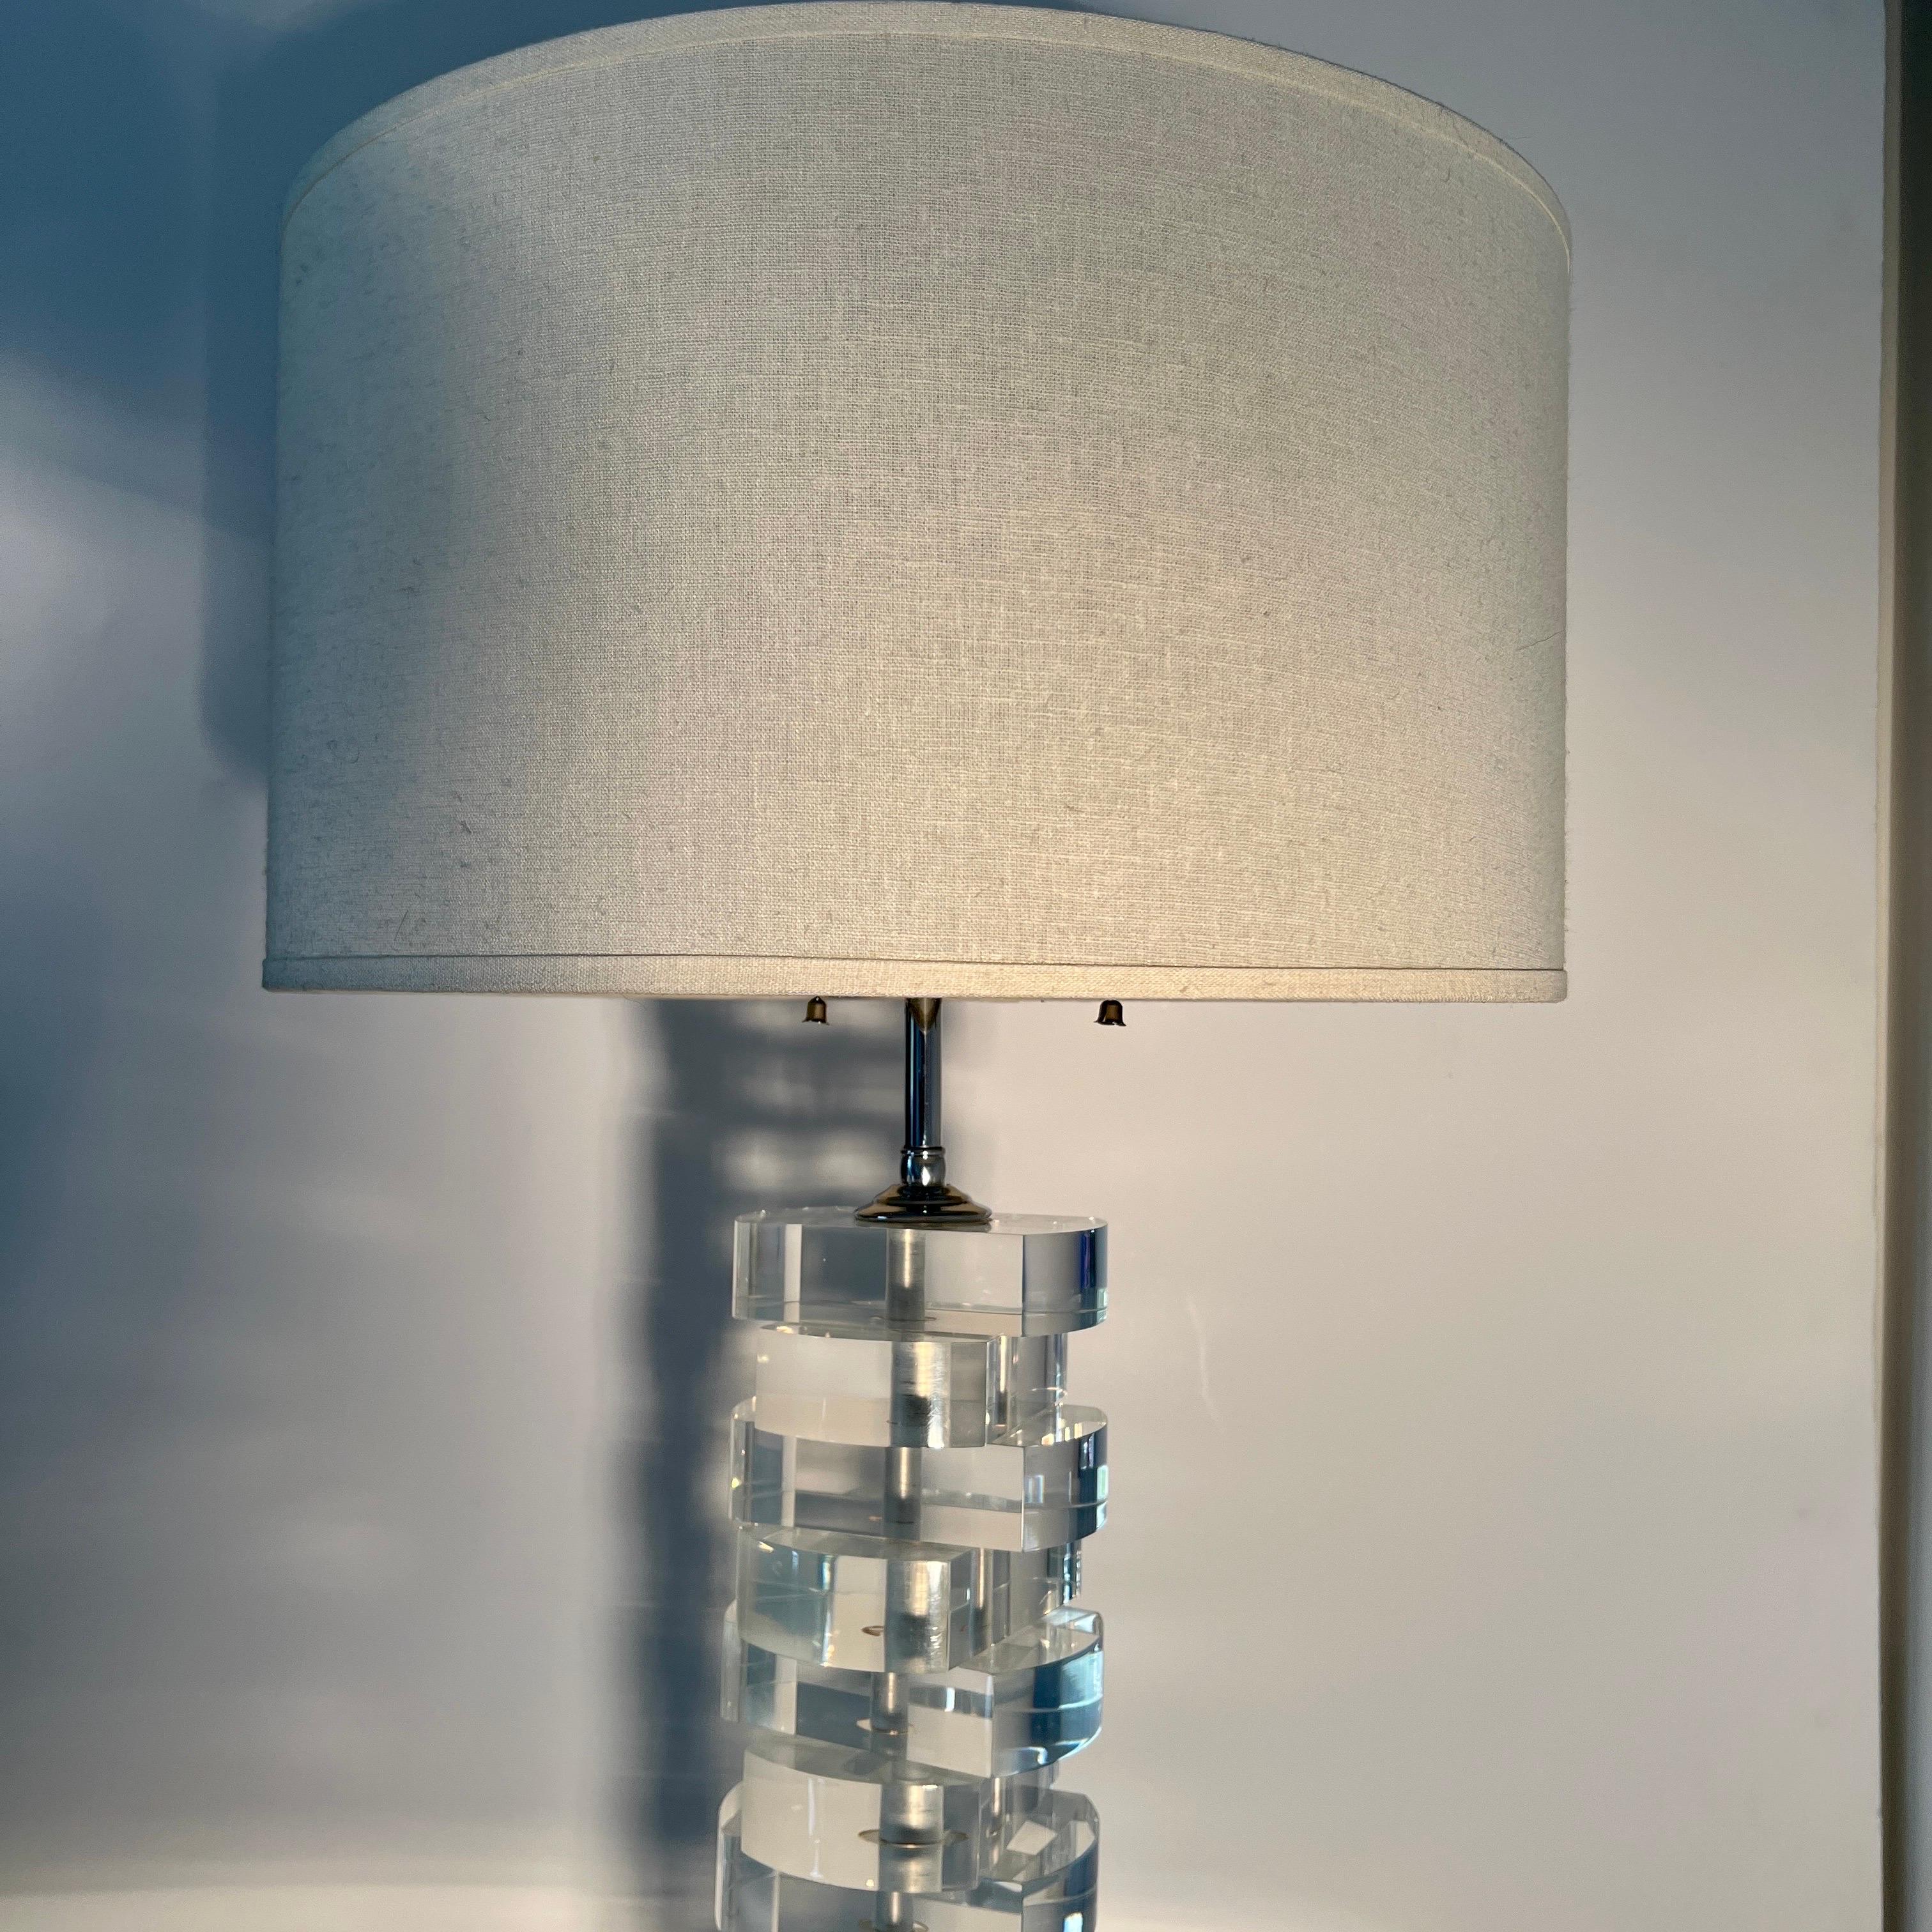 Late 20th Century Lucite and Chrome Table Lamp by Karl Springer, c. 1970's For Sale